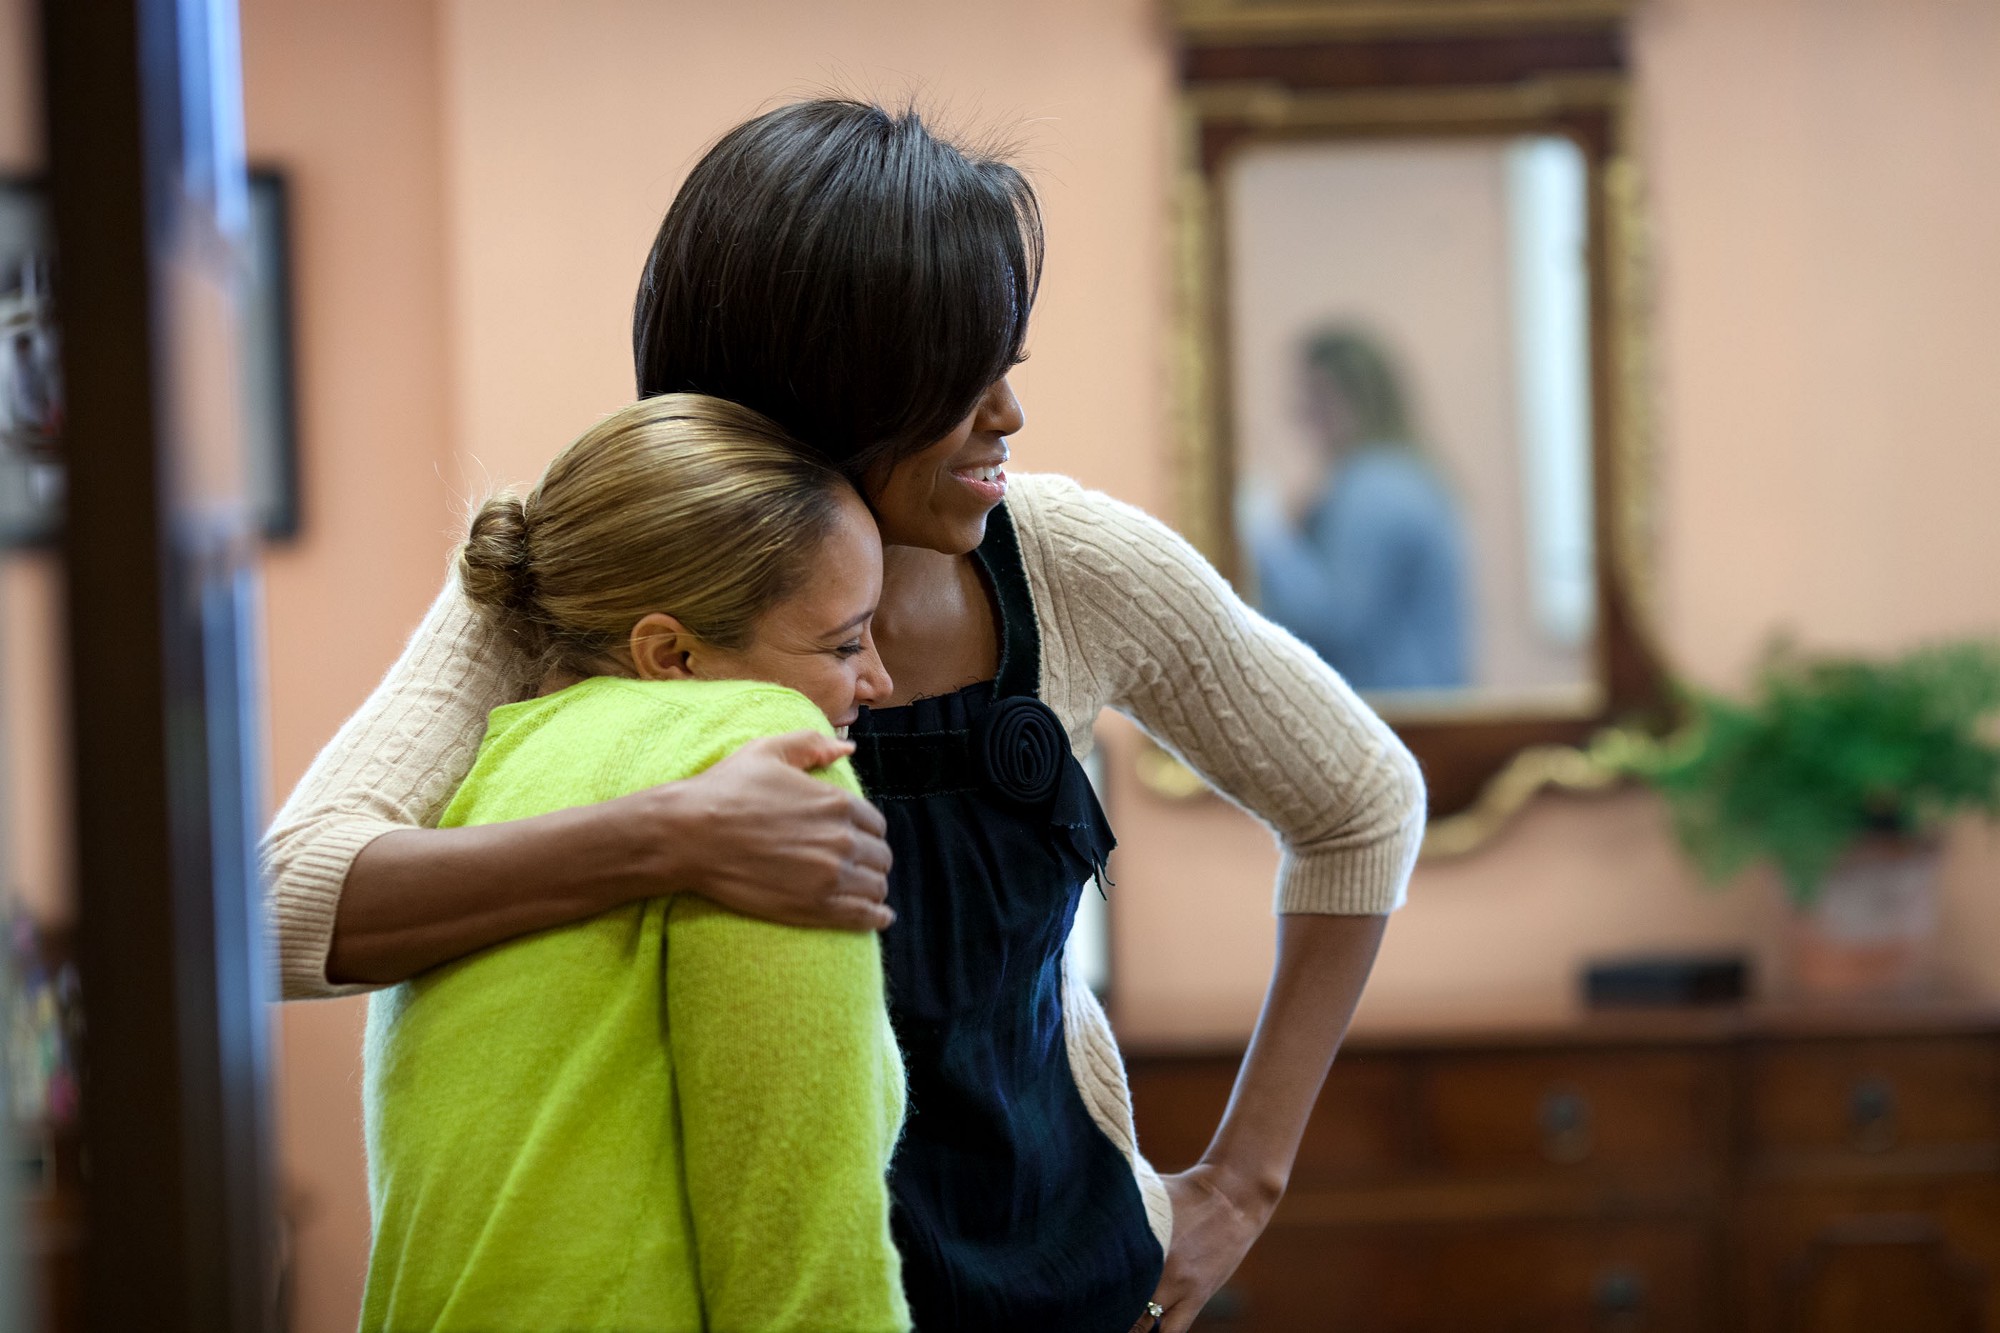 Jan. 14, 2011. With former aide Kristen Jarvis. (Official White House Photo by Chuck Kennedy)